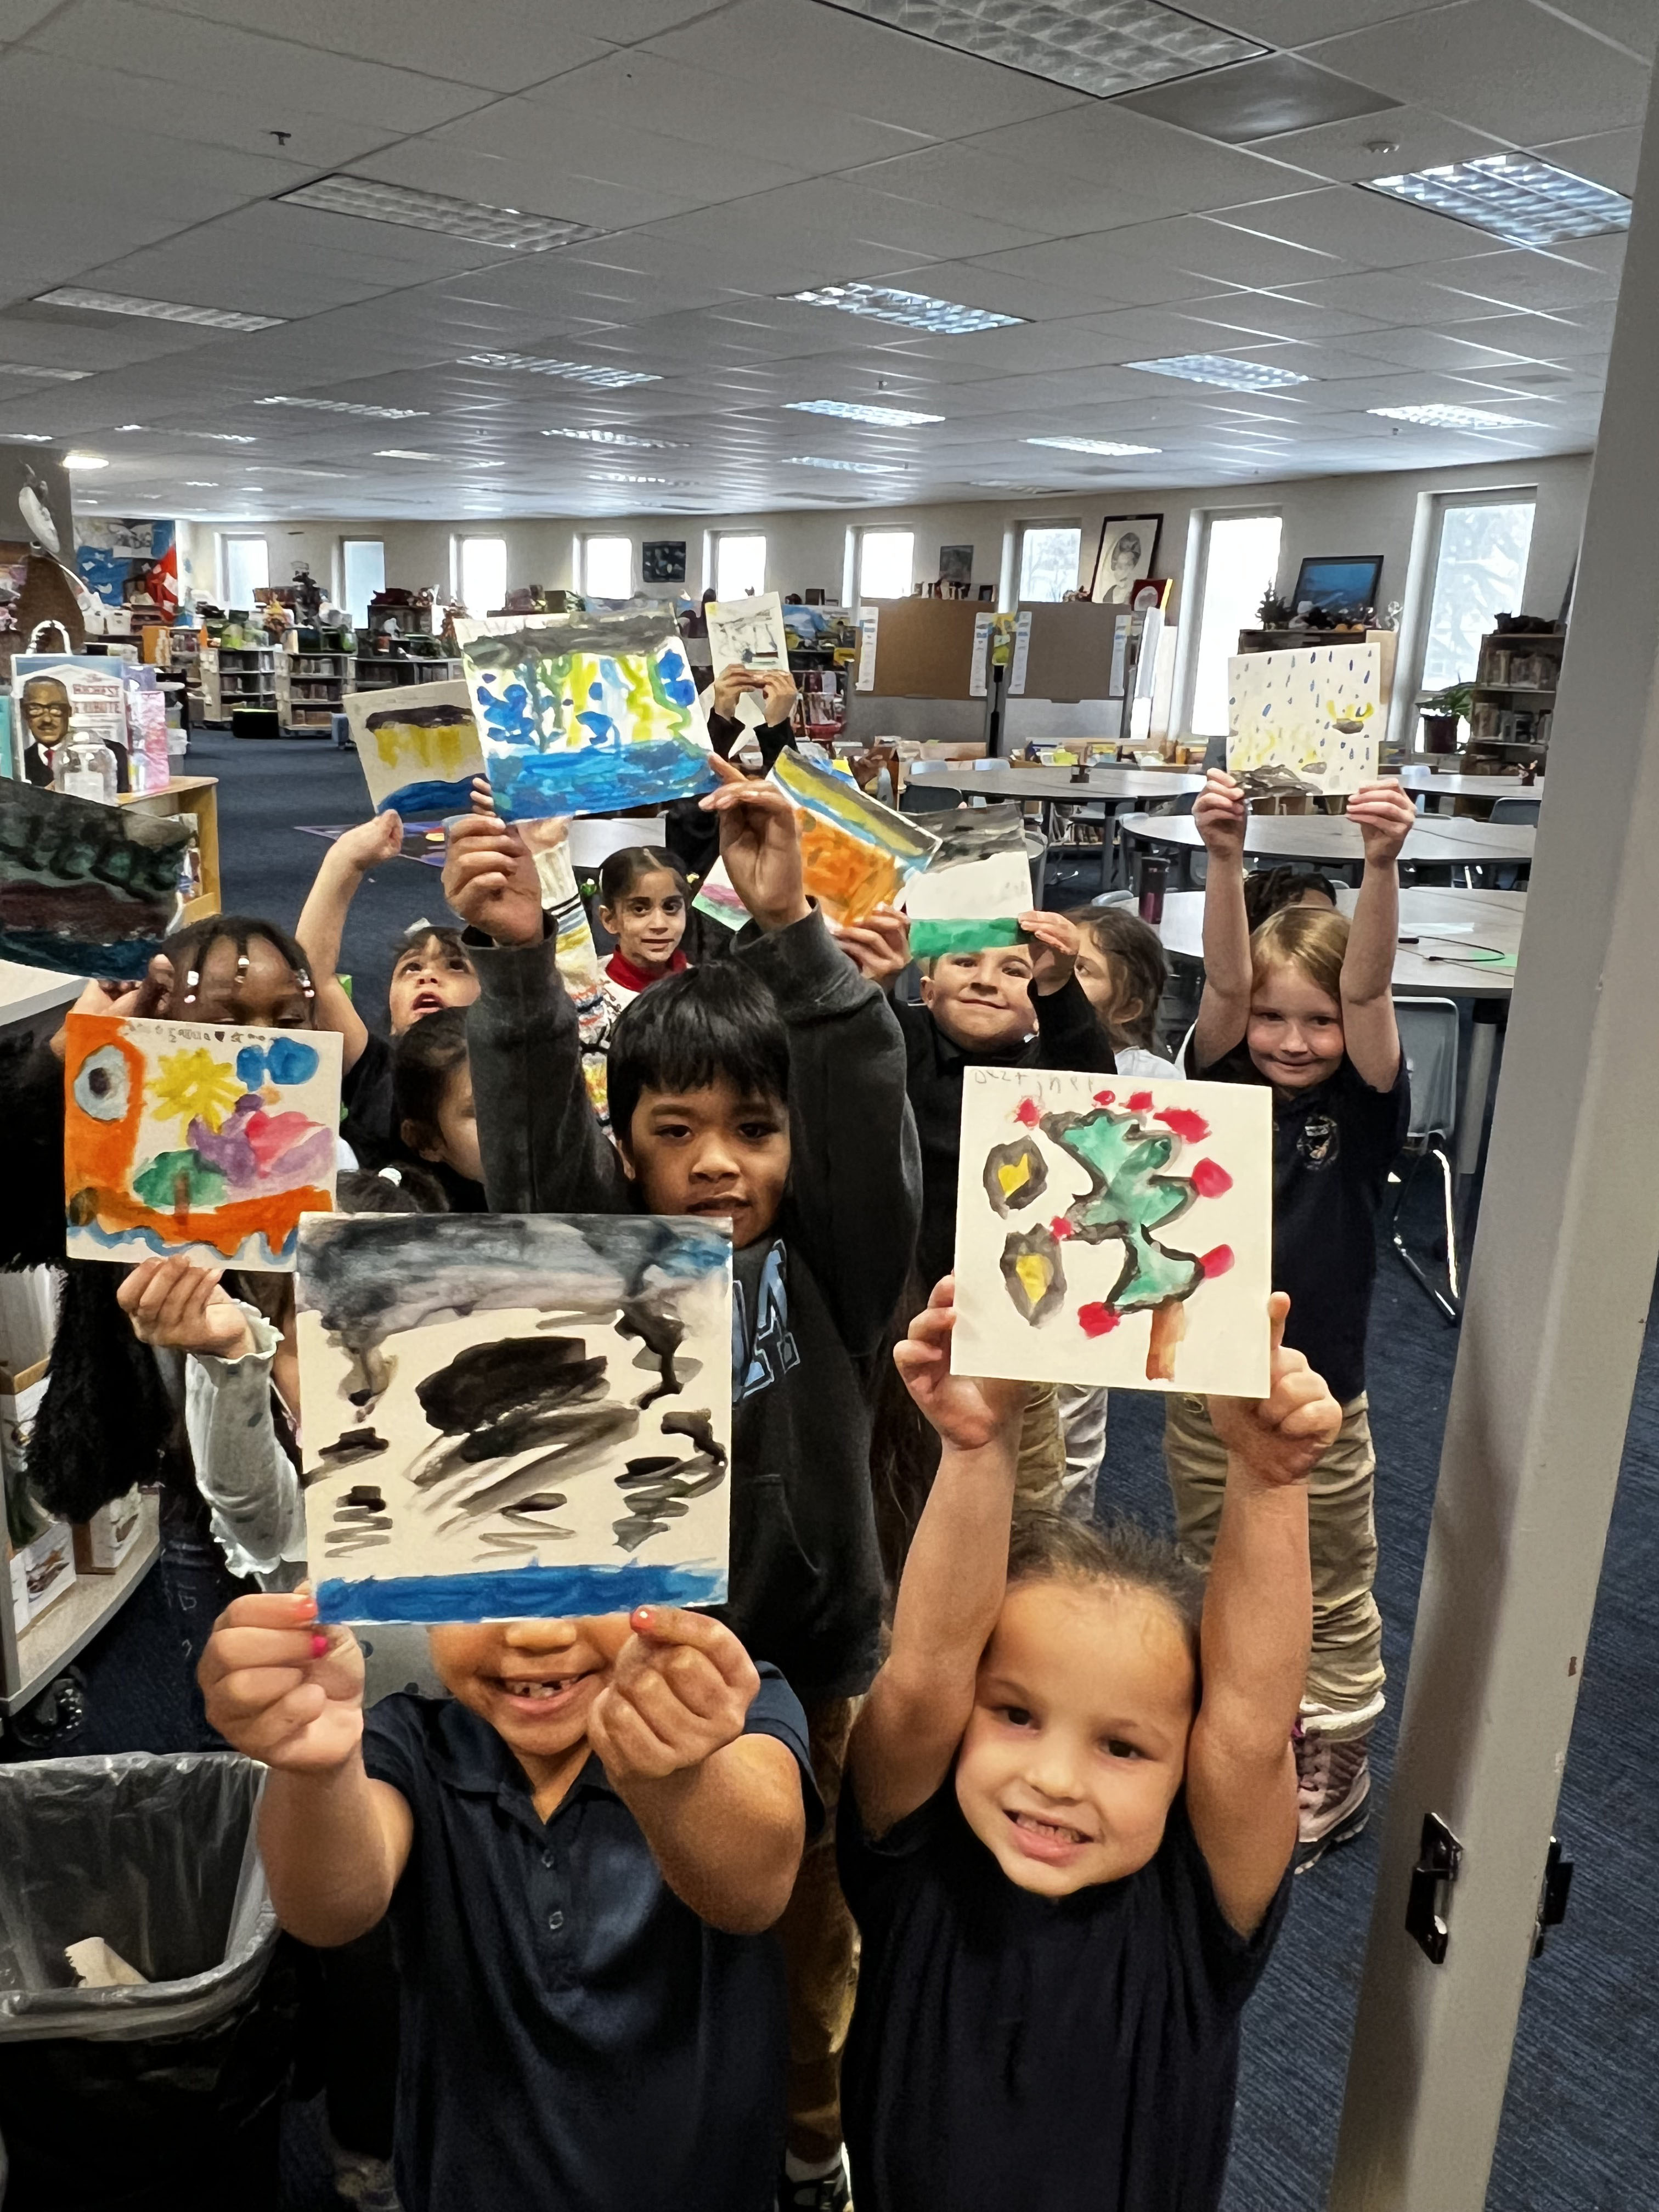 Kindergarteners from Denver's Maxwell Elementary School show off their artwork after participating in a lesson about the water cycle with CU Boulder’s Elementary Arts Lab. The process of making the watercolor paintings was used to illustrate the water cycle in real time (precipitation from their brush to the paper and then evaporation of water from the paper leaving the painting behind).